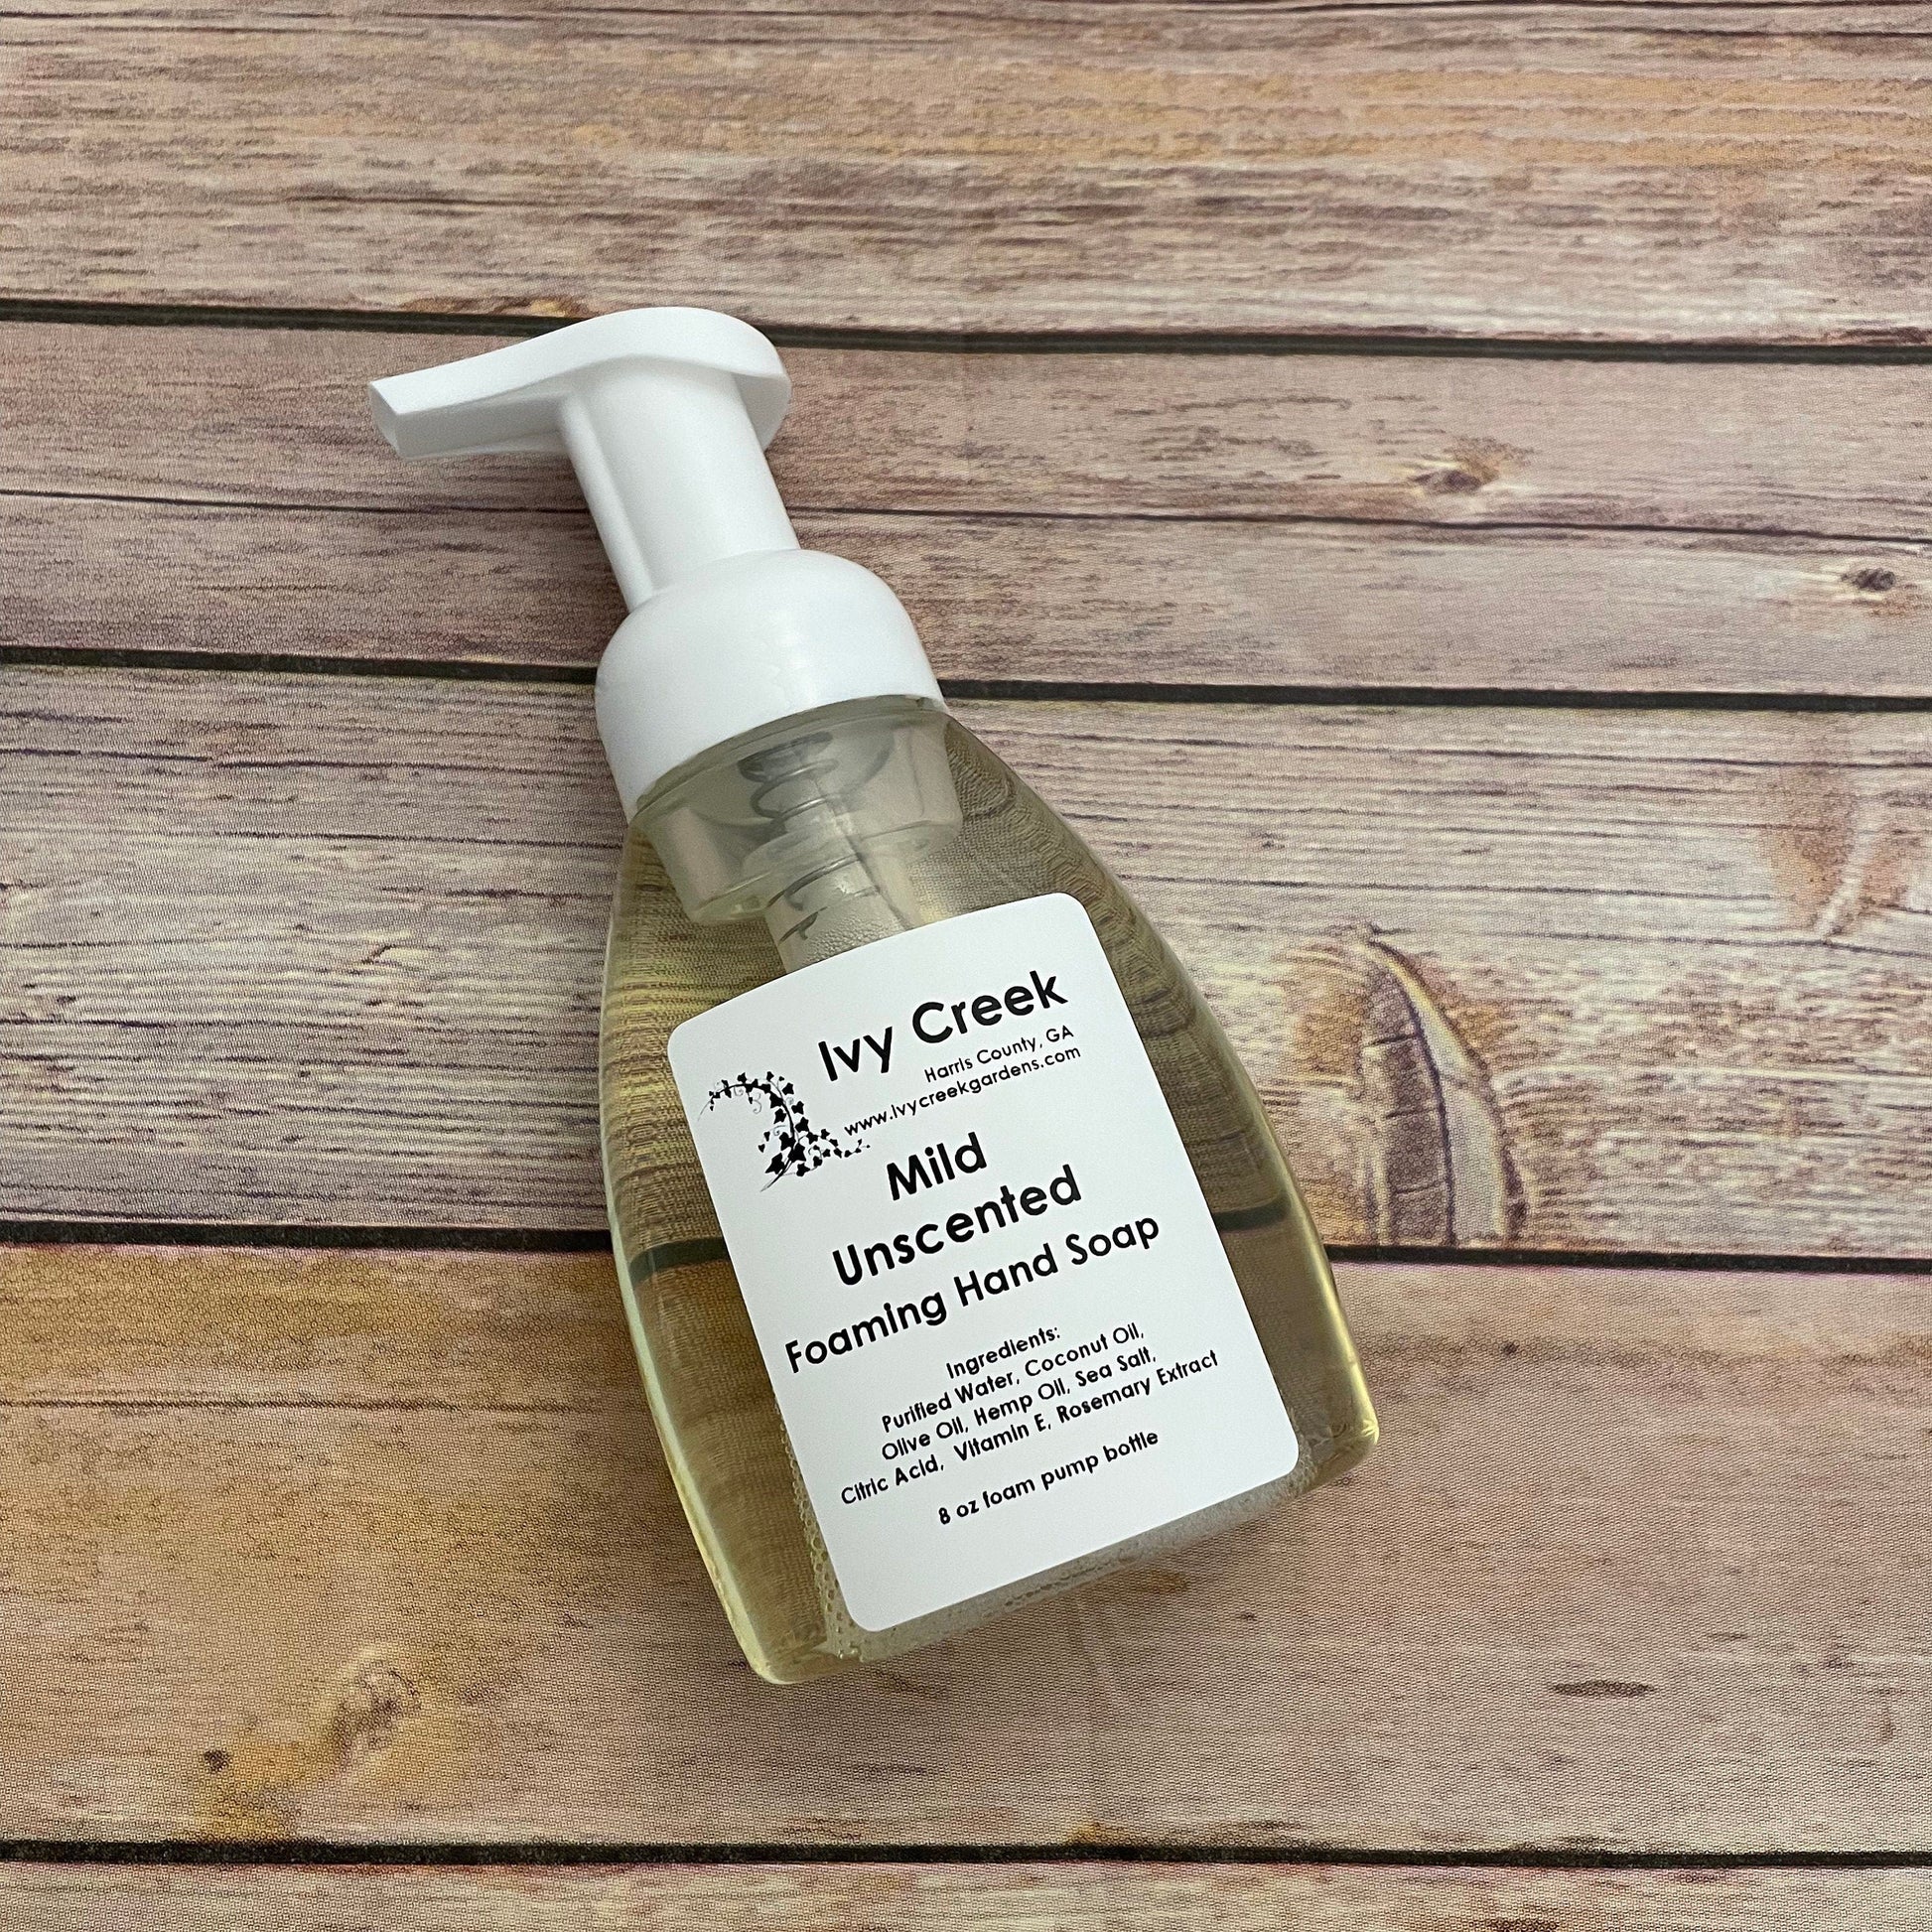 Ivy Creek Mild Unscented Foaming Hand Soap | Foaming Hand Soap | Natural Hand Soap | 8 oz